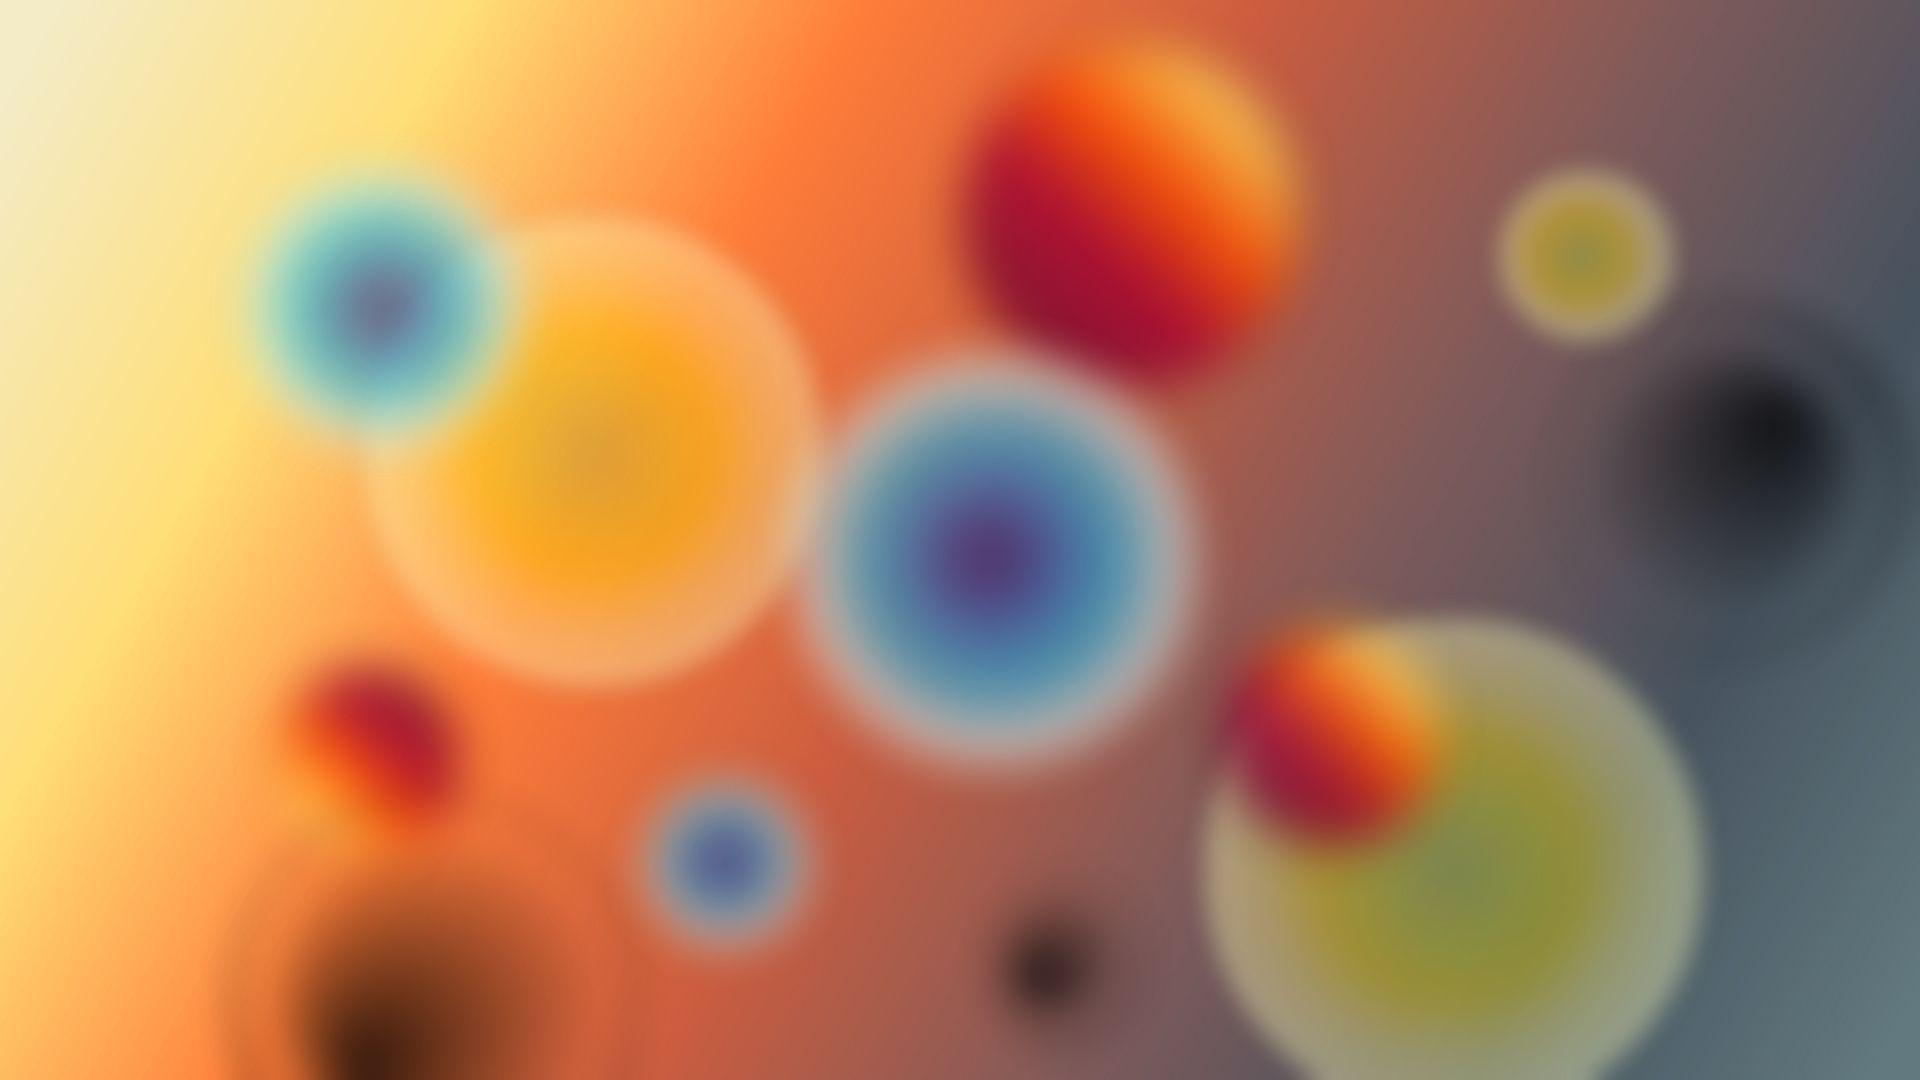 Blurry Circle Wallpaper. Abstract Wallpaper Gallery